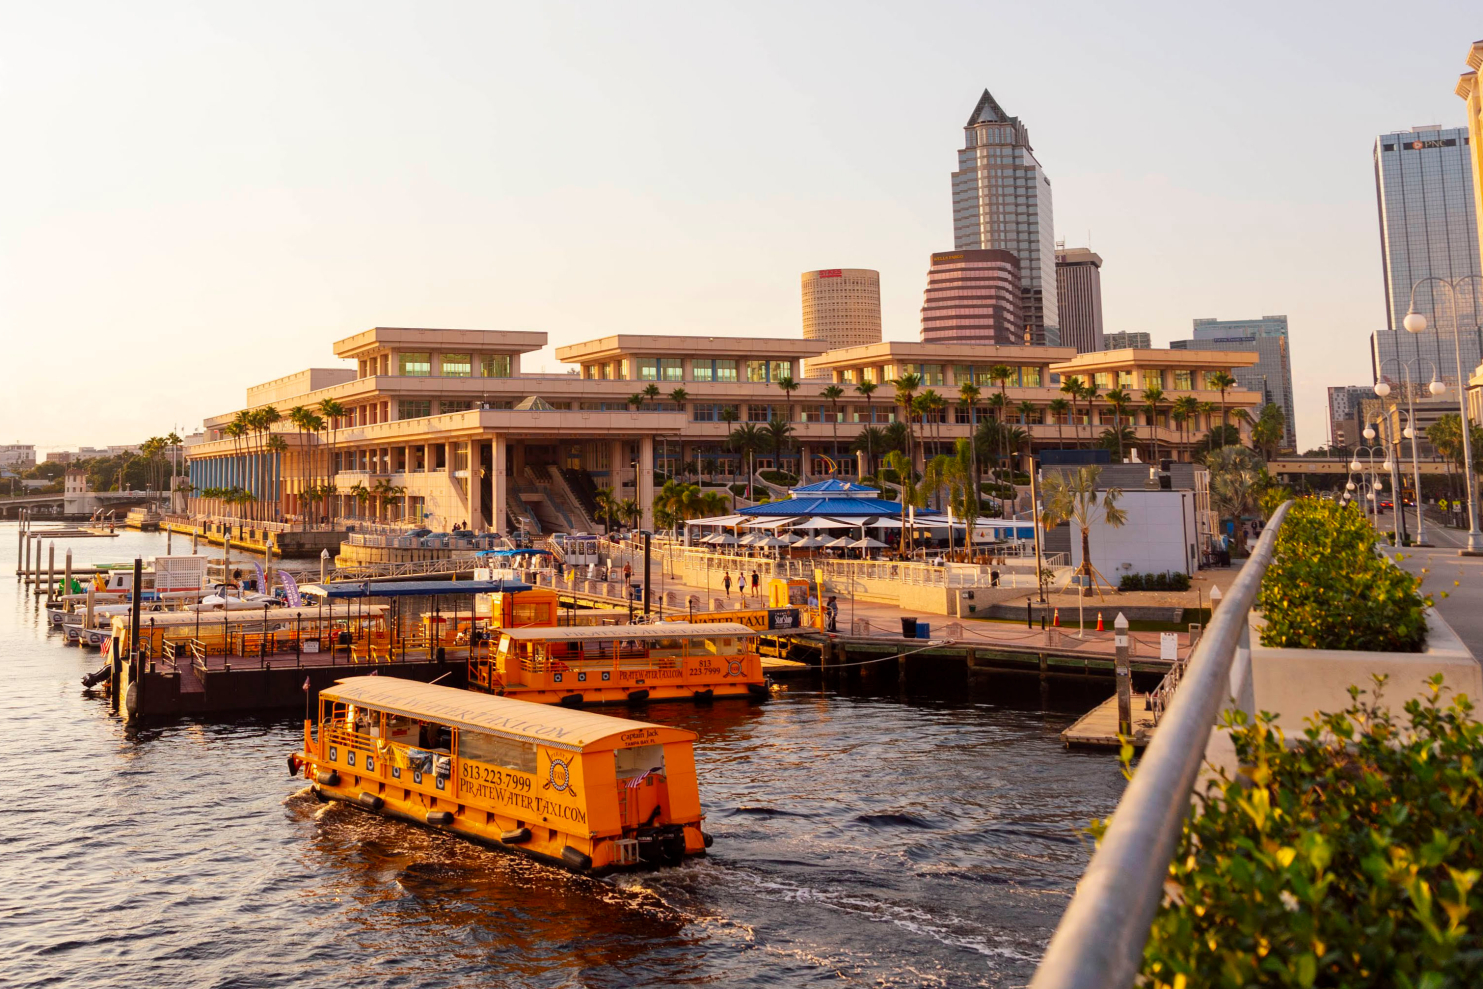 Mobile Tour: Pirate for a Day – Get Out on the Water and Explore Downtown Tampa’s Diversity